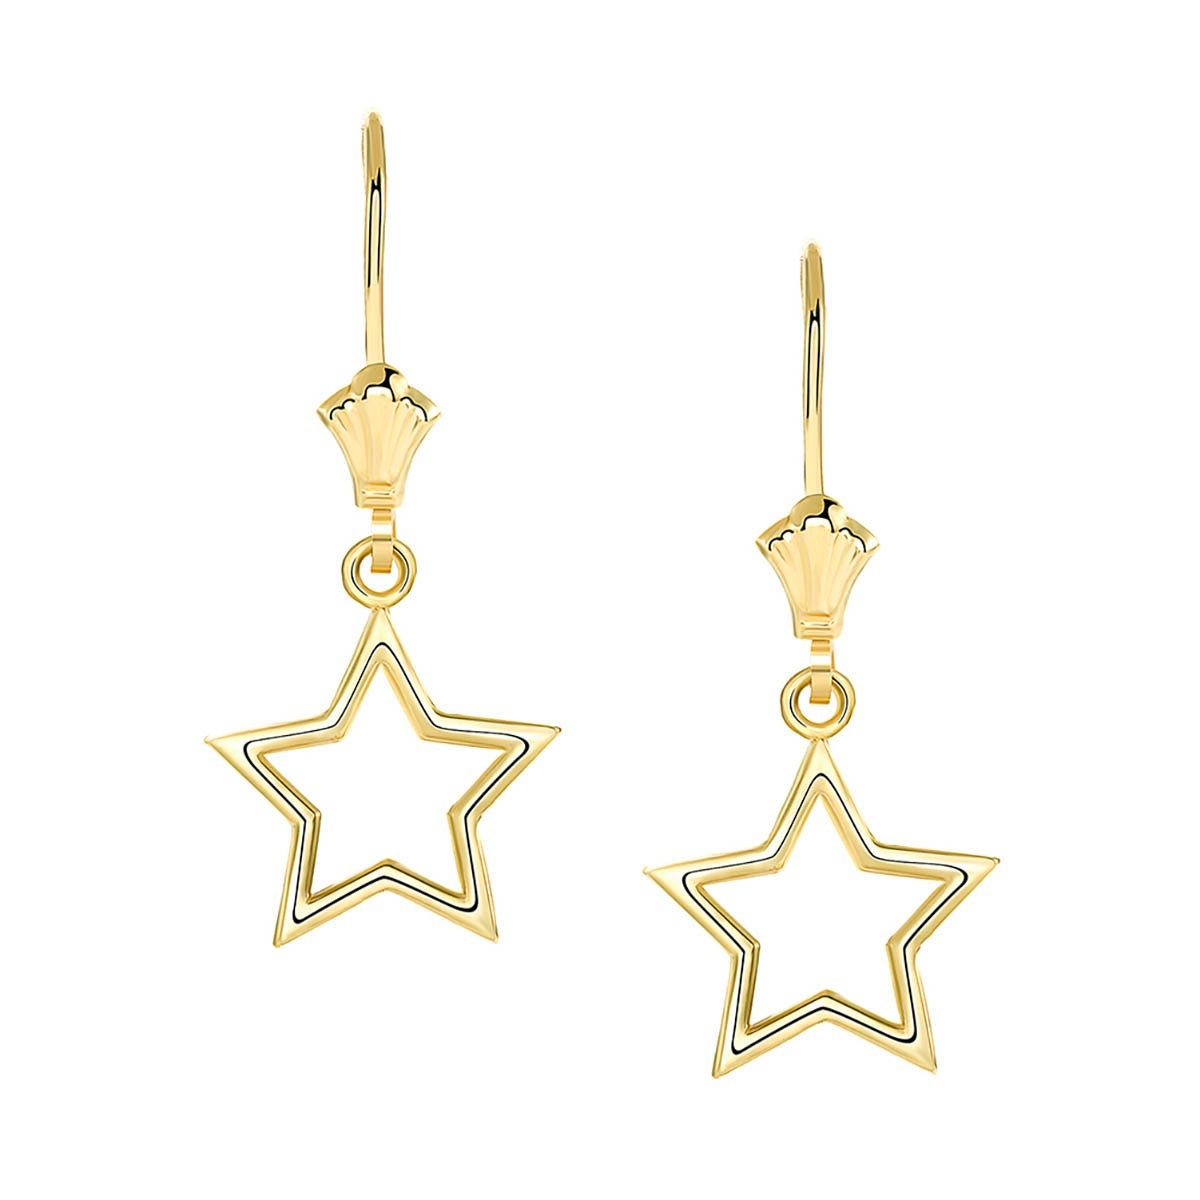 Gold Boutique - Gents Earrings Gold GOOFASH